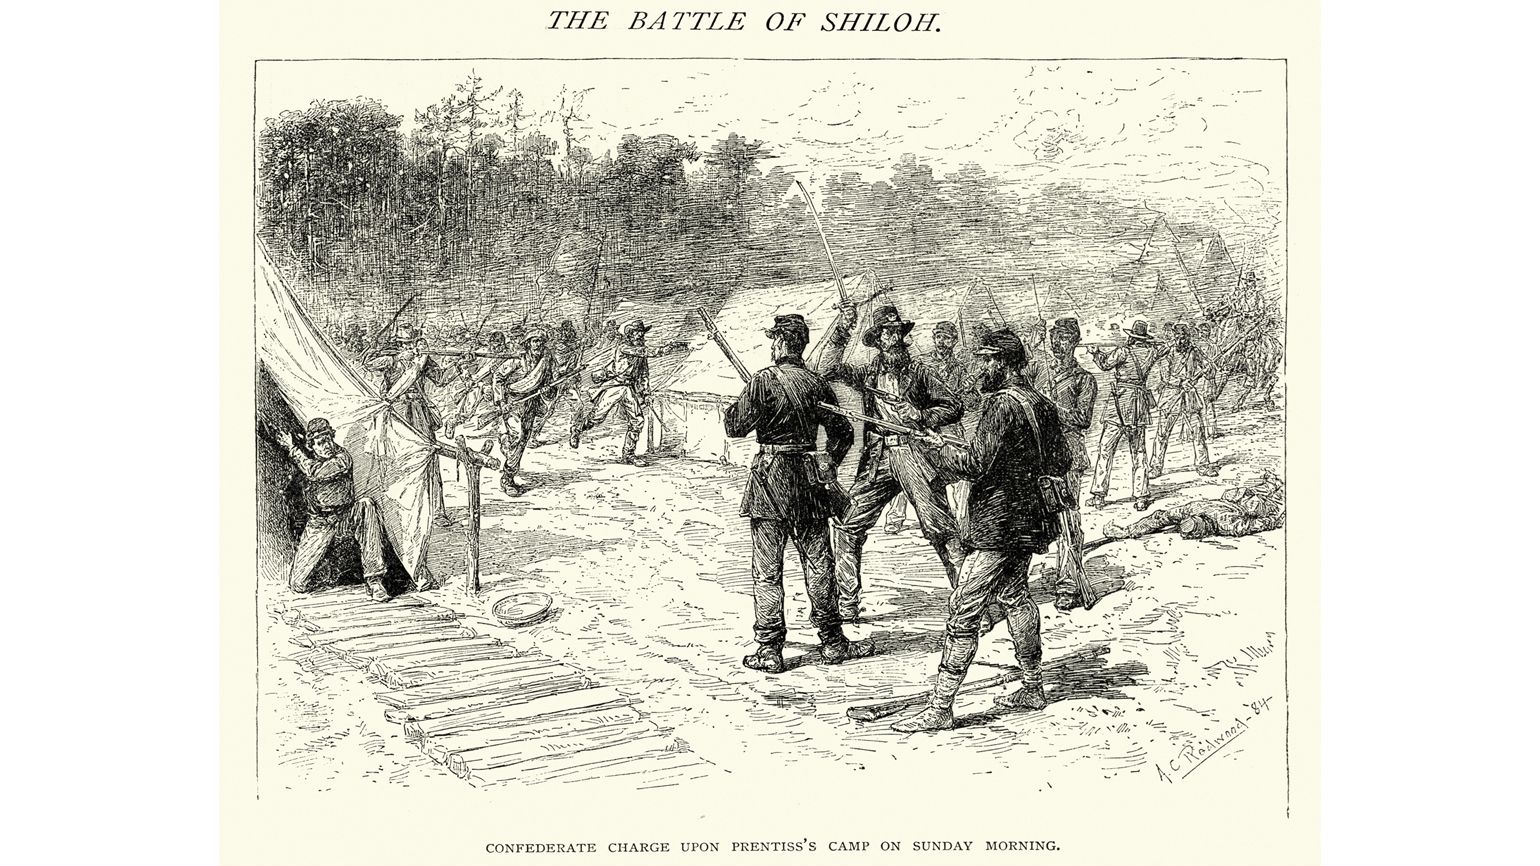 An engraving of soldiers at the Battle of Shiloh, which began on April 6, 1862.